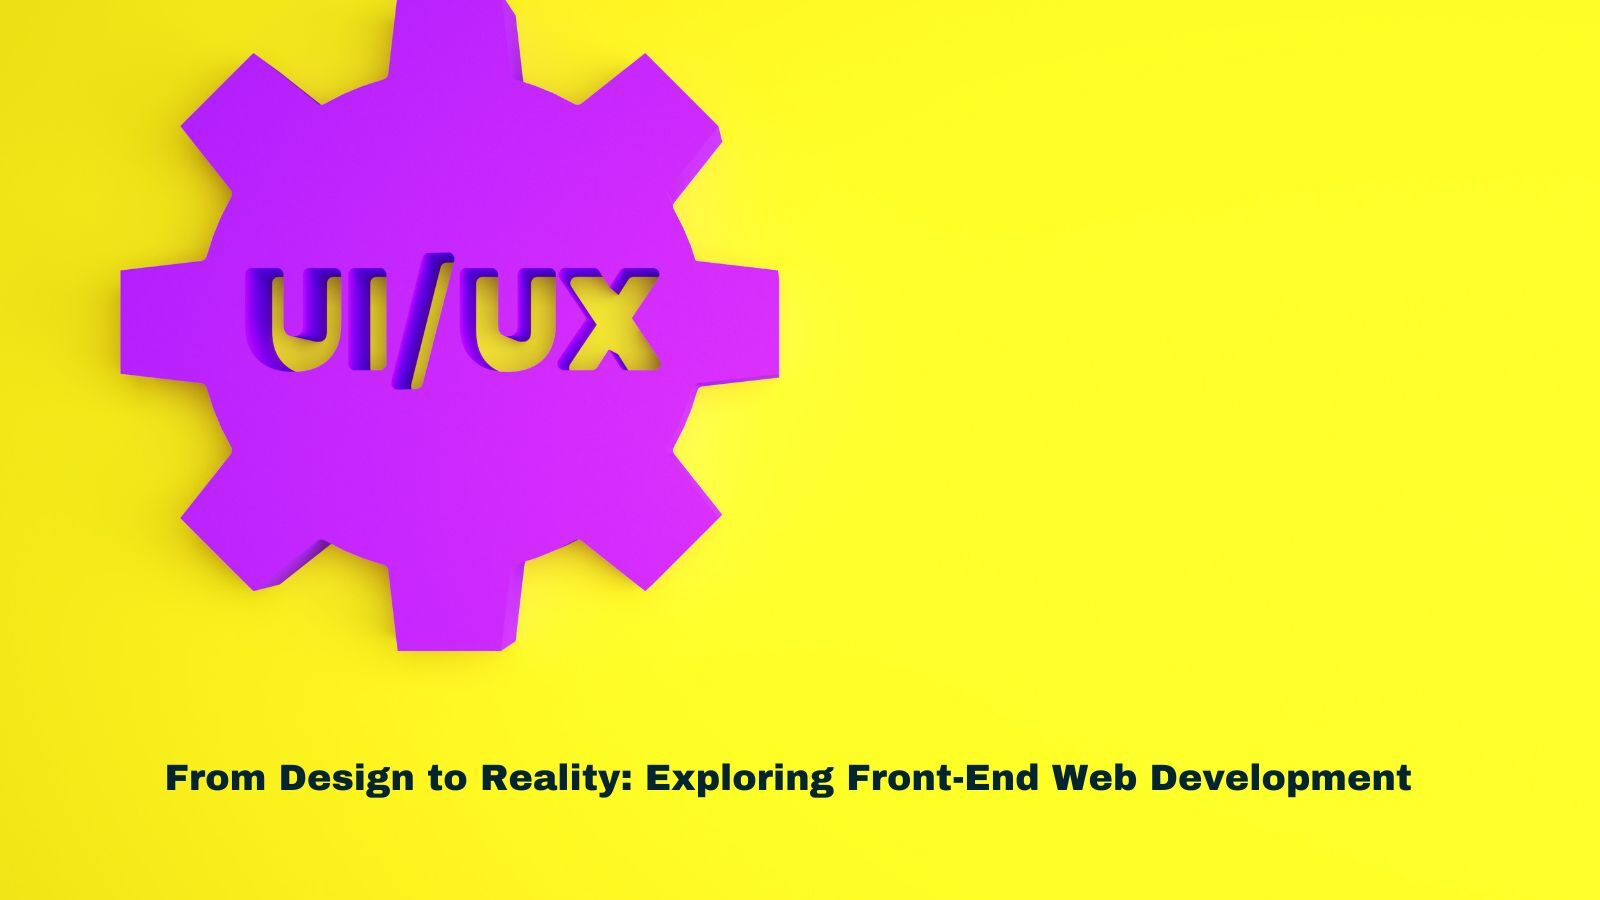 From Design to Reality: Exploring Front-End Web Development